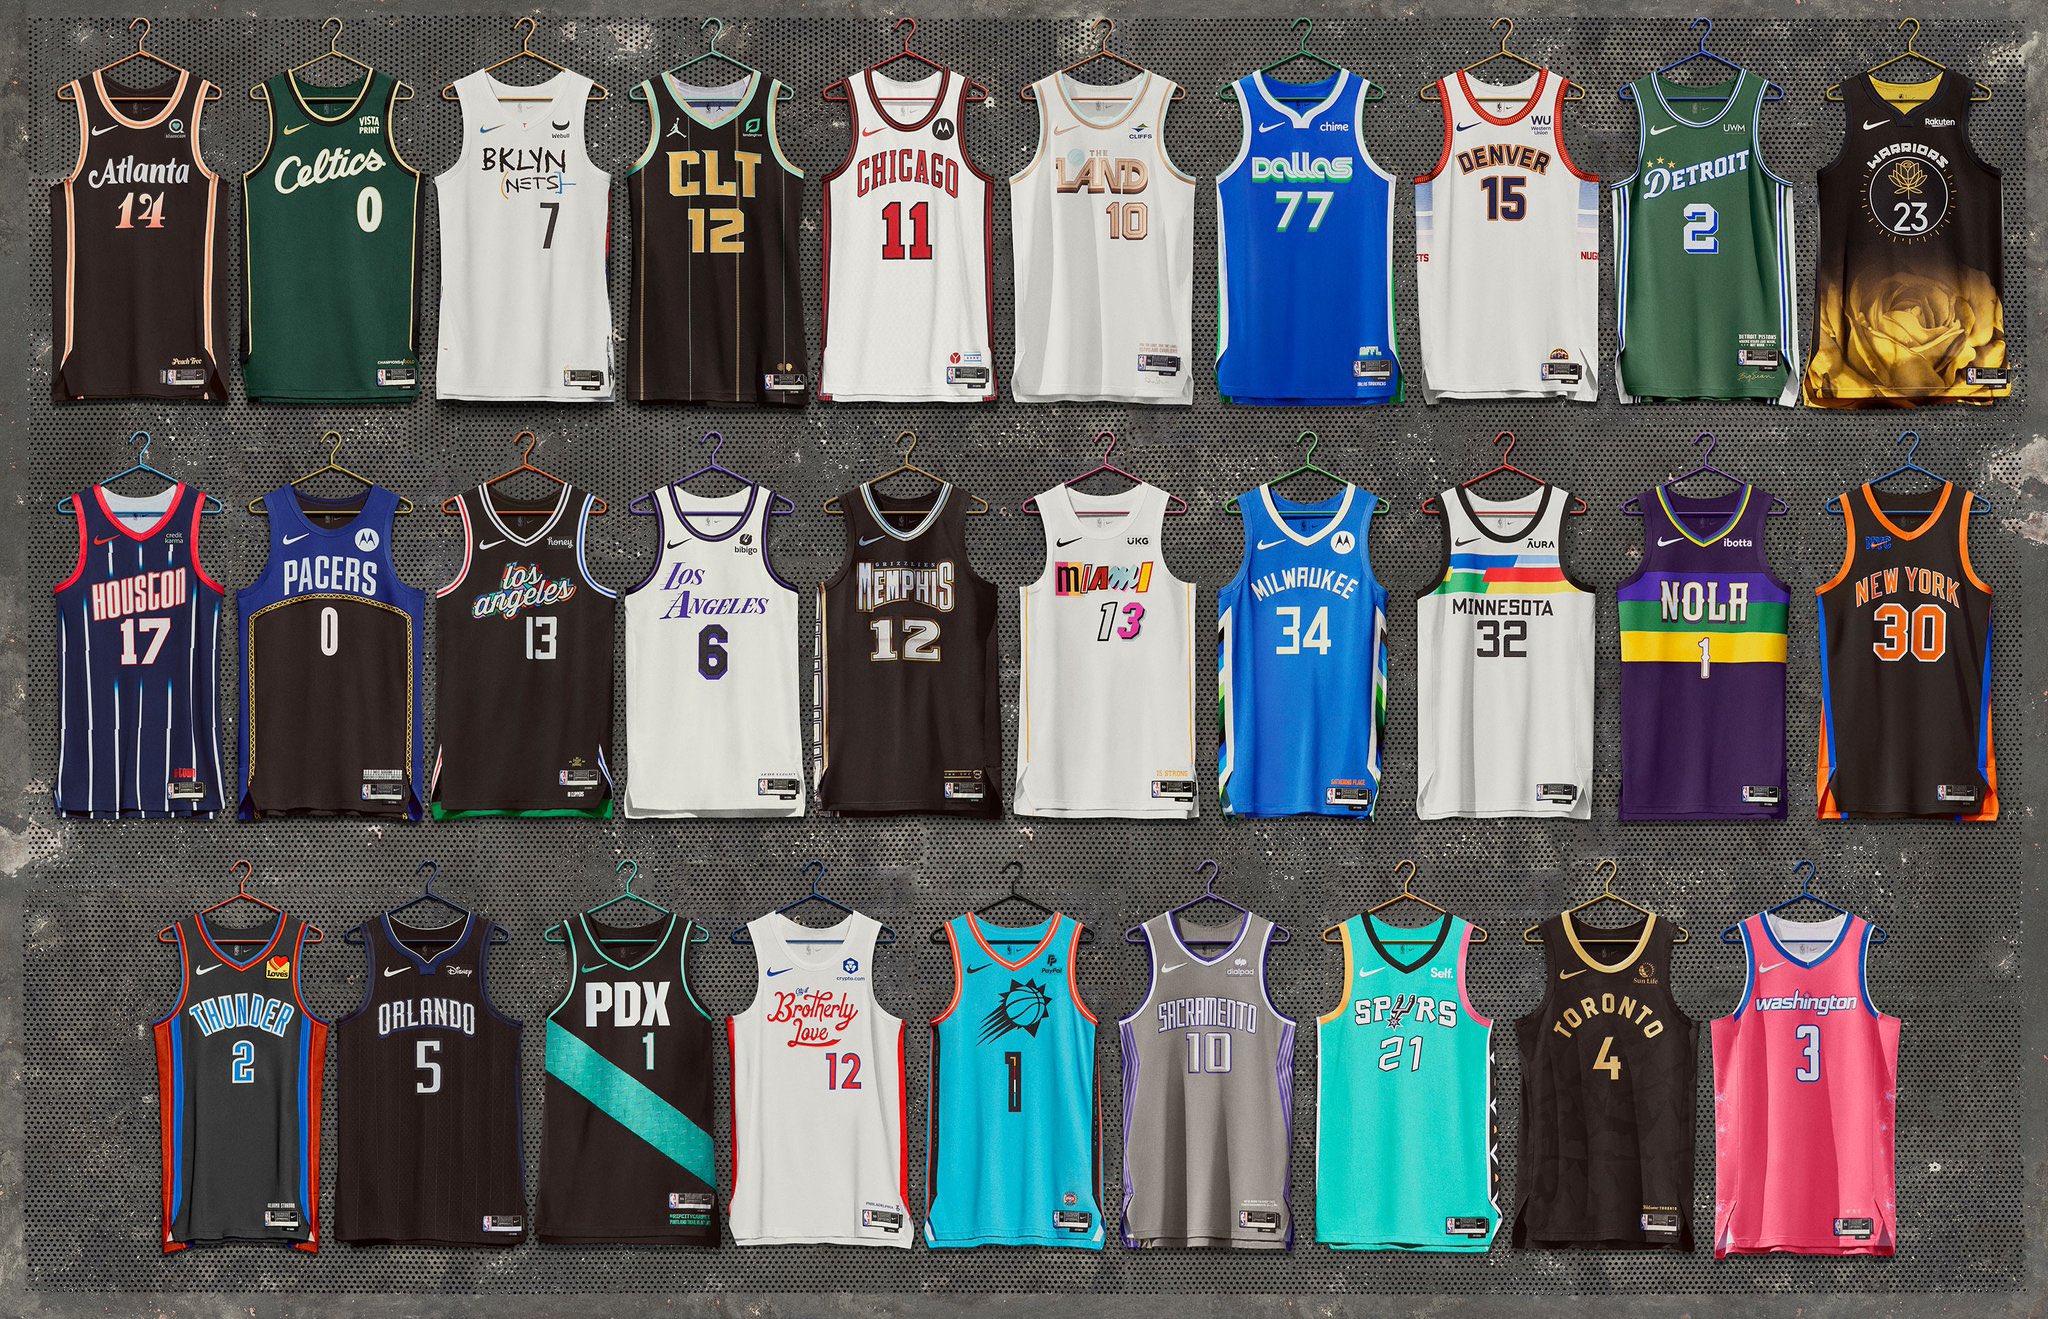 Help - Looking for 2017-18 GSW The Town Jersey!! It's in the NBA